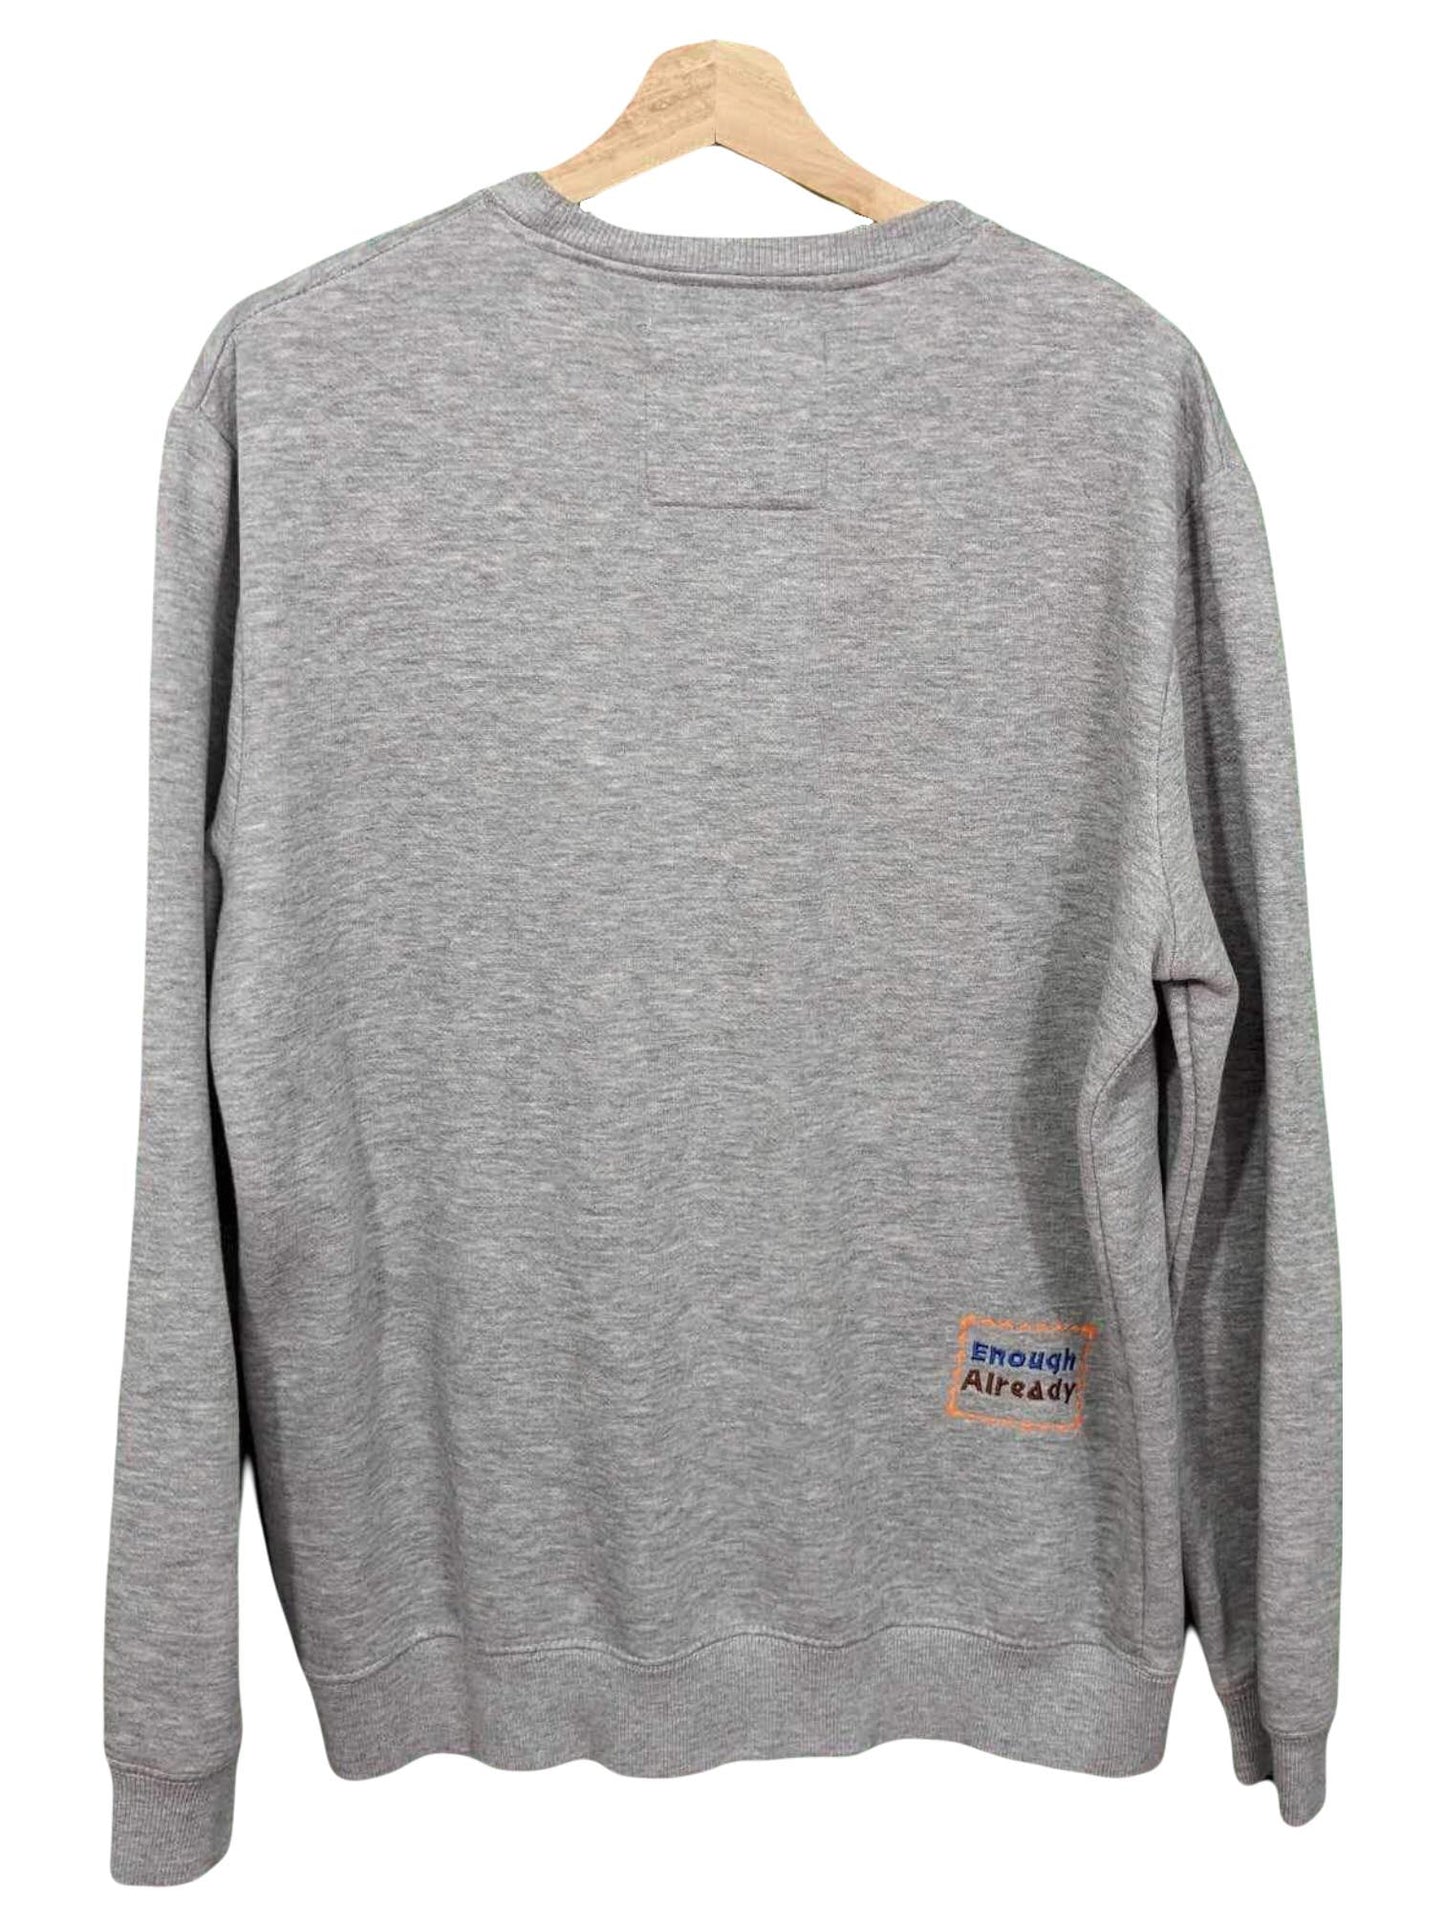 Size Medium Classic Grey Sweatshirt with Embroidered Autumnal William Wordsworth Quote and Scarecrow Design